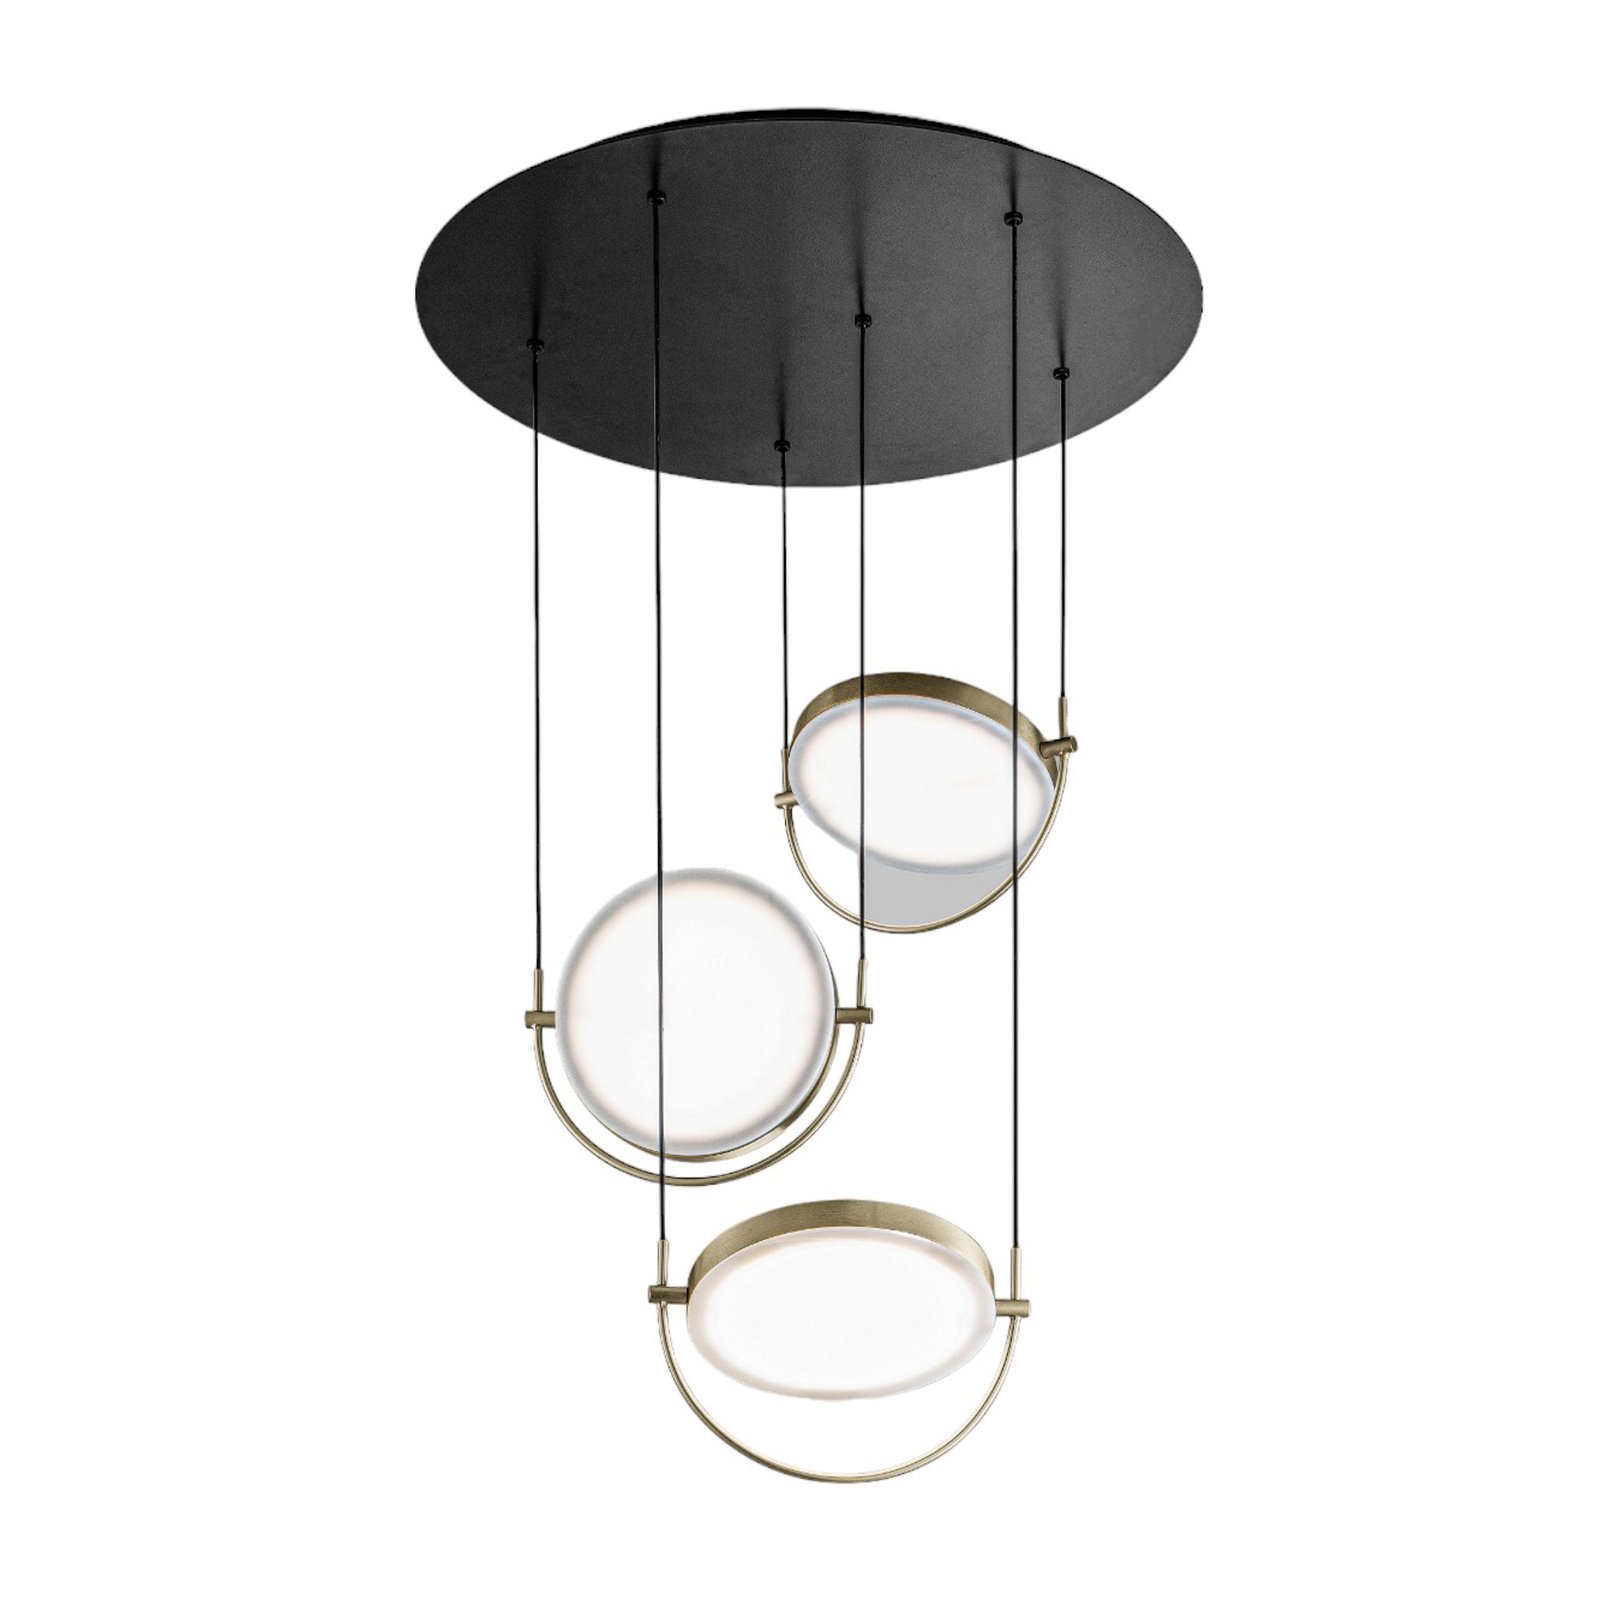 LED hanglamp Giotto, 3-lamps, goud